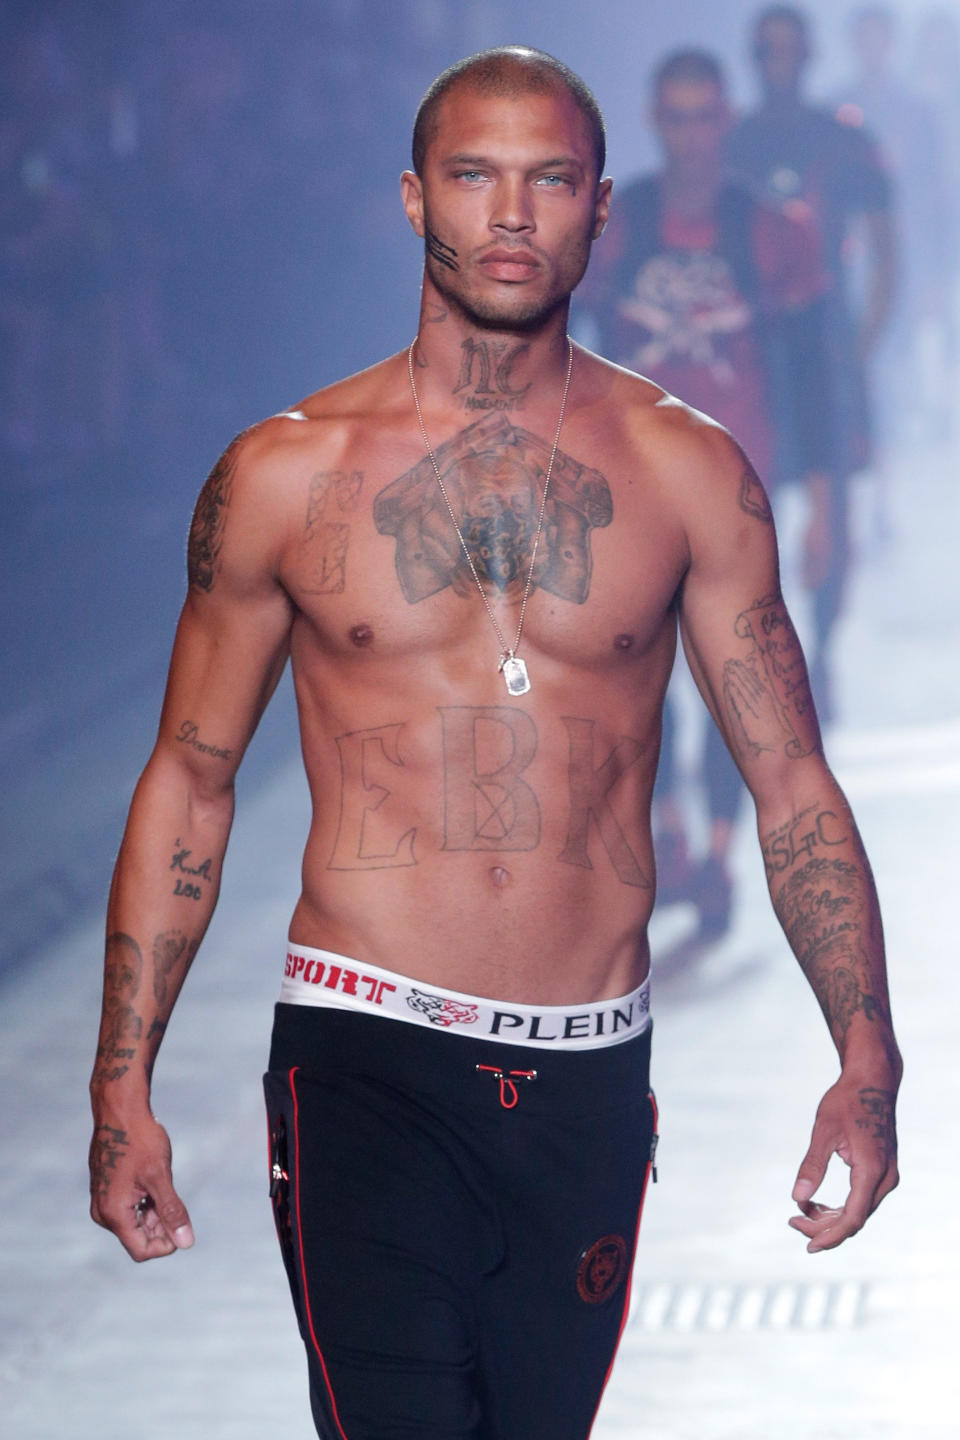 Model Jeremy Meeks, who went viral a few years ago after his handsome mugshot appeared on Facebook, took the Milan runways by storm this past weekend.